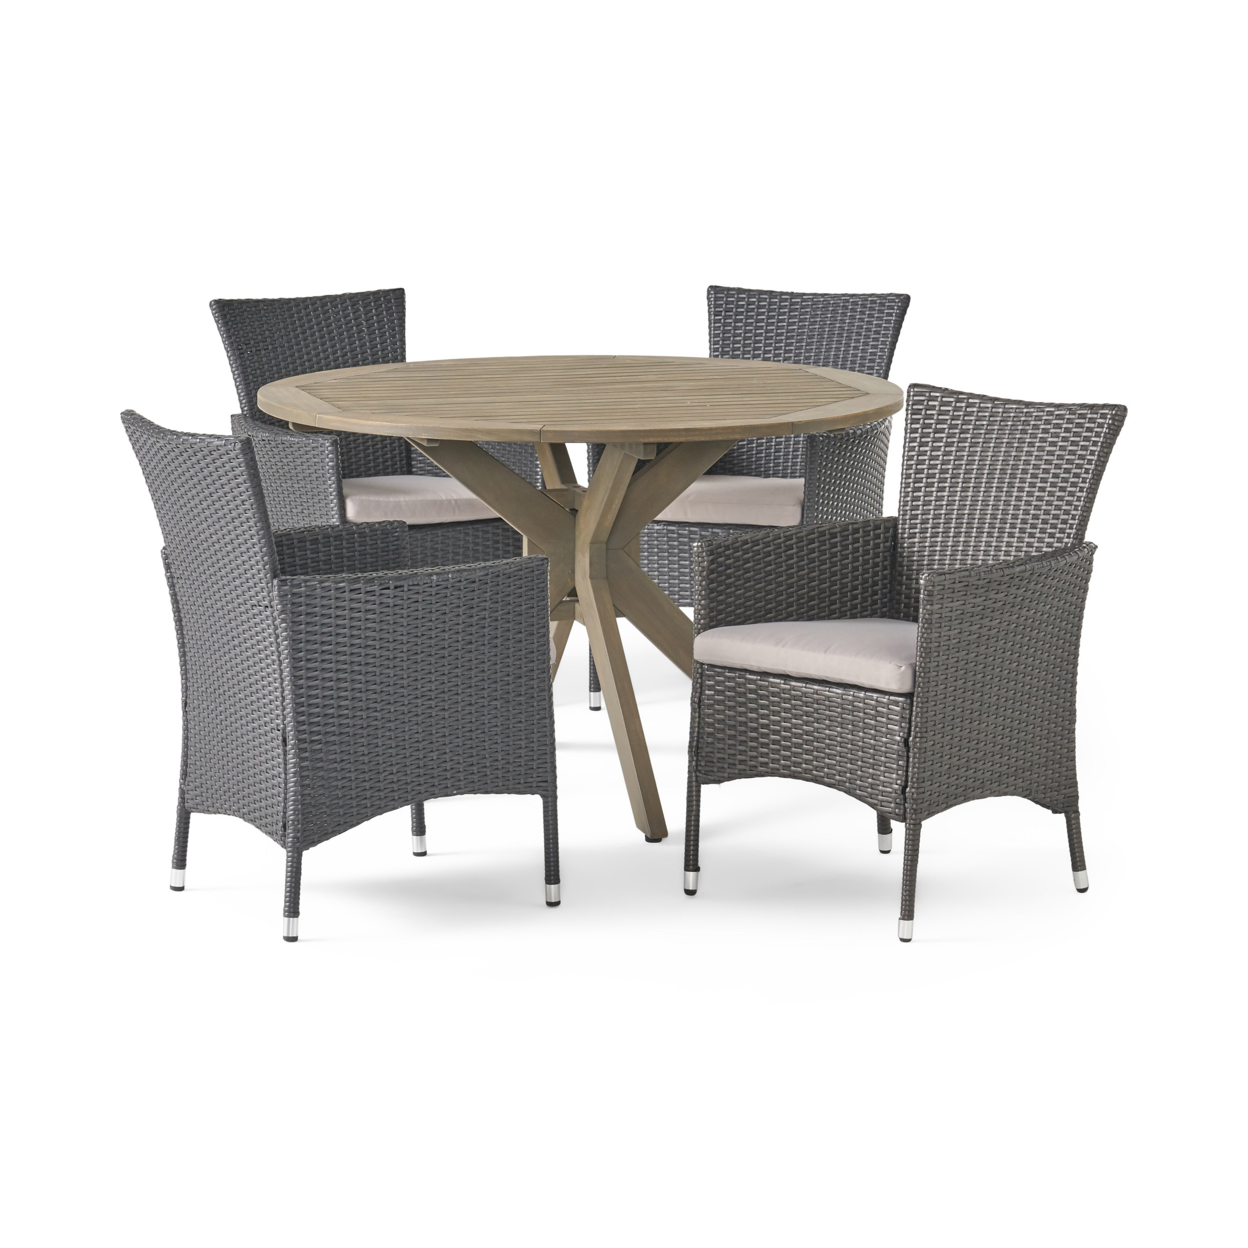 Key Outdoor 5 Piece Wood And Wicker Dining Set, Gray And Gray